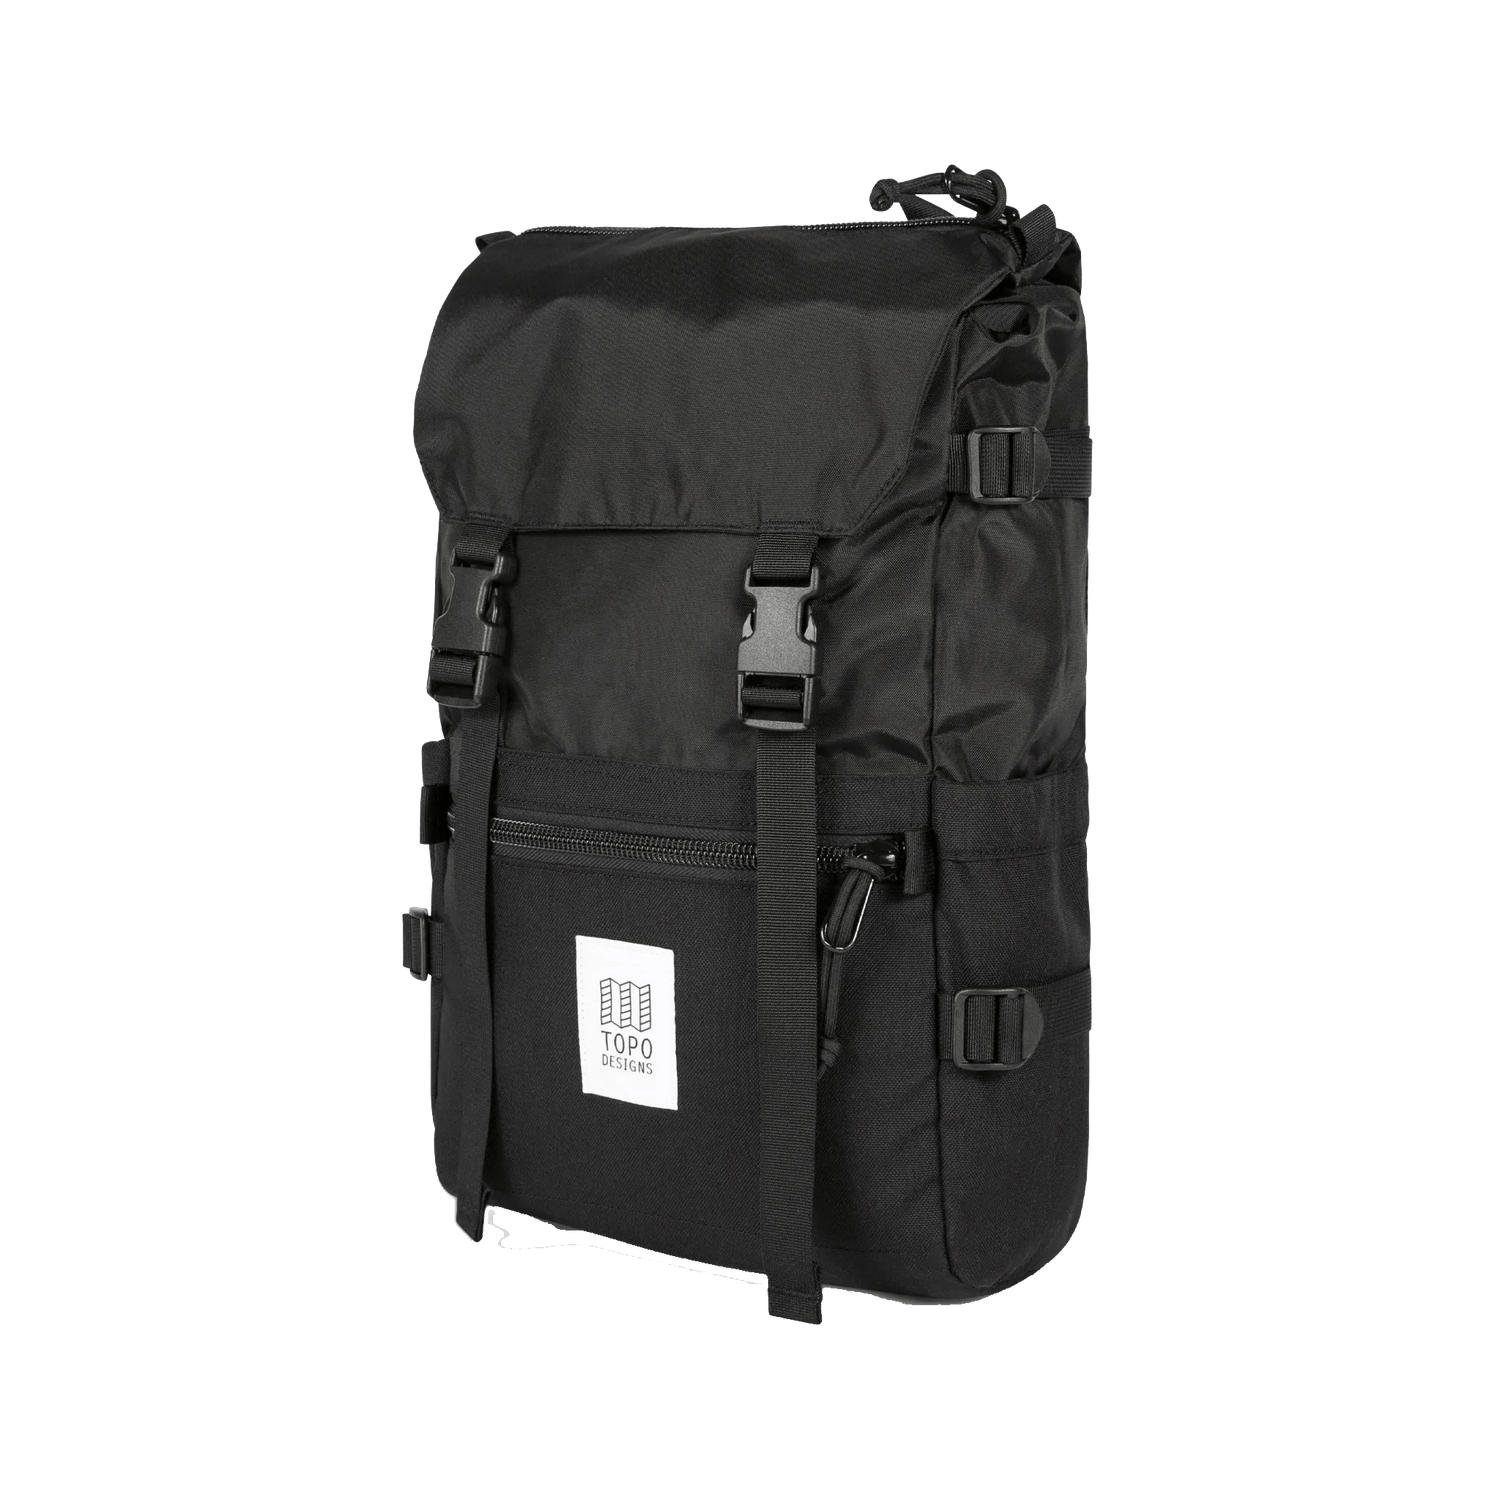 Topo Designs Rover Pack Classic Laptop Backpack - Custom